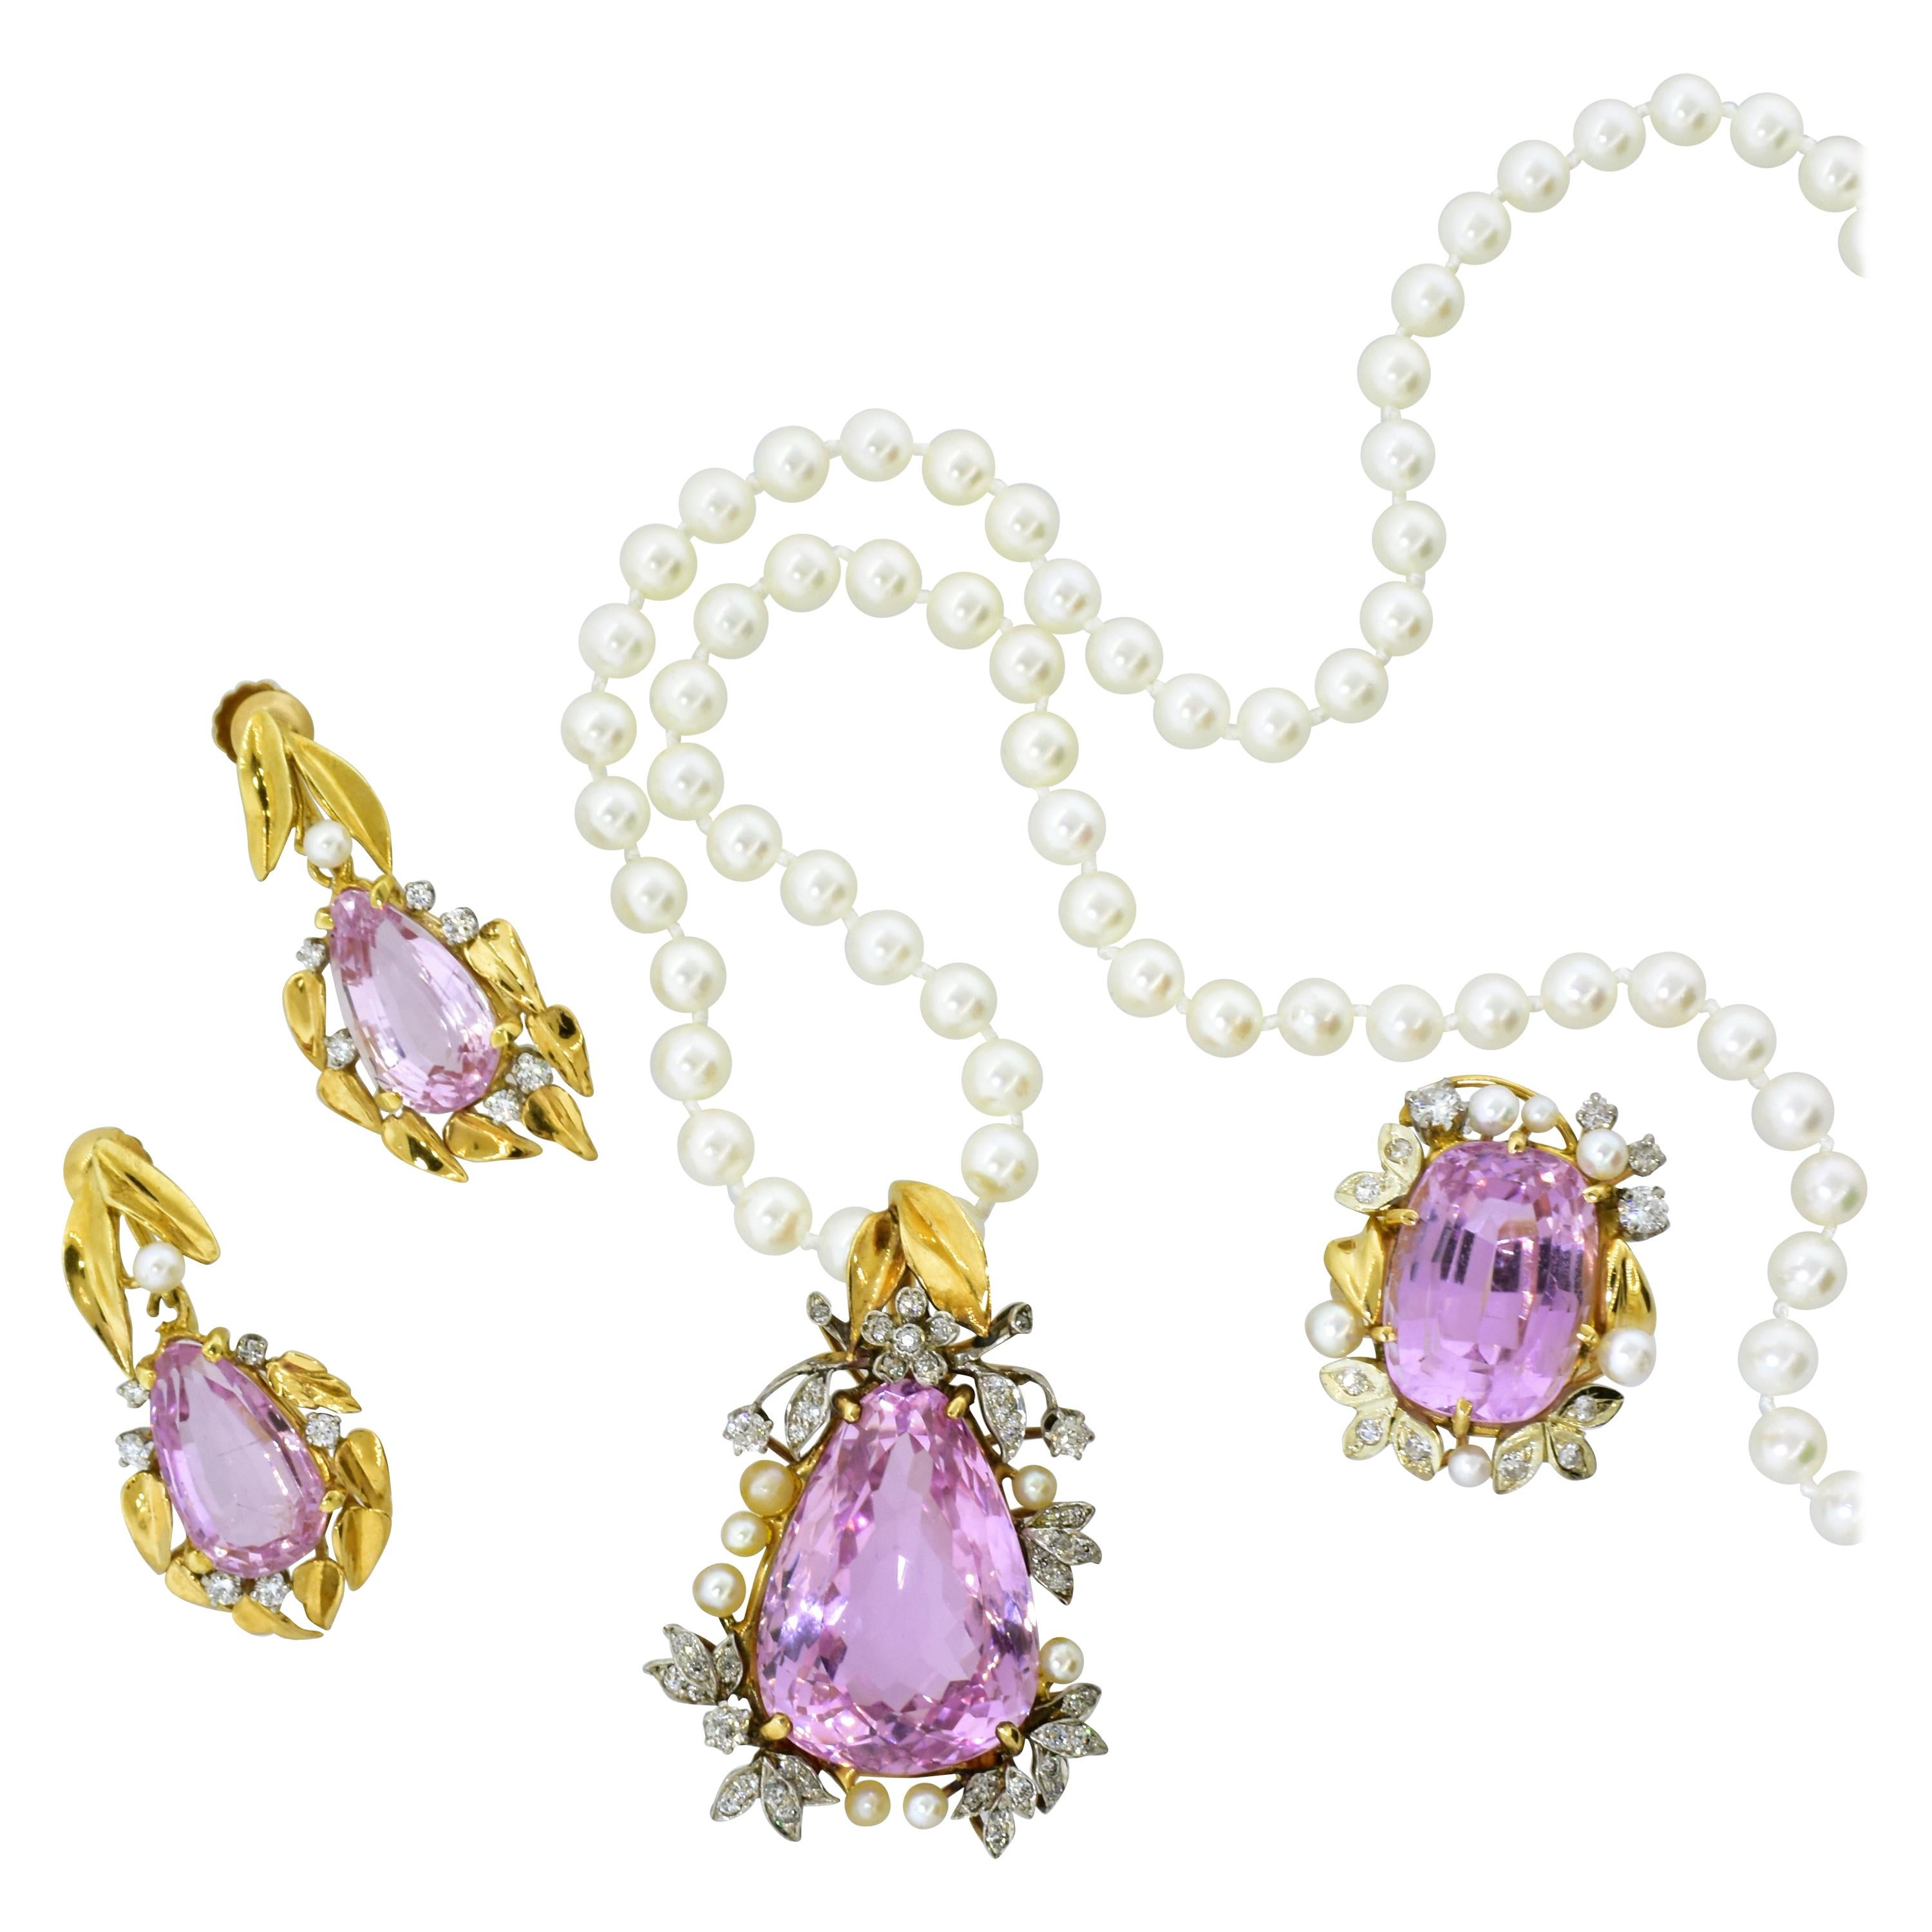 Pink Kunzite, Diamond and Pearl Suite in Platinum and Gold, circa 1935